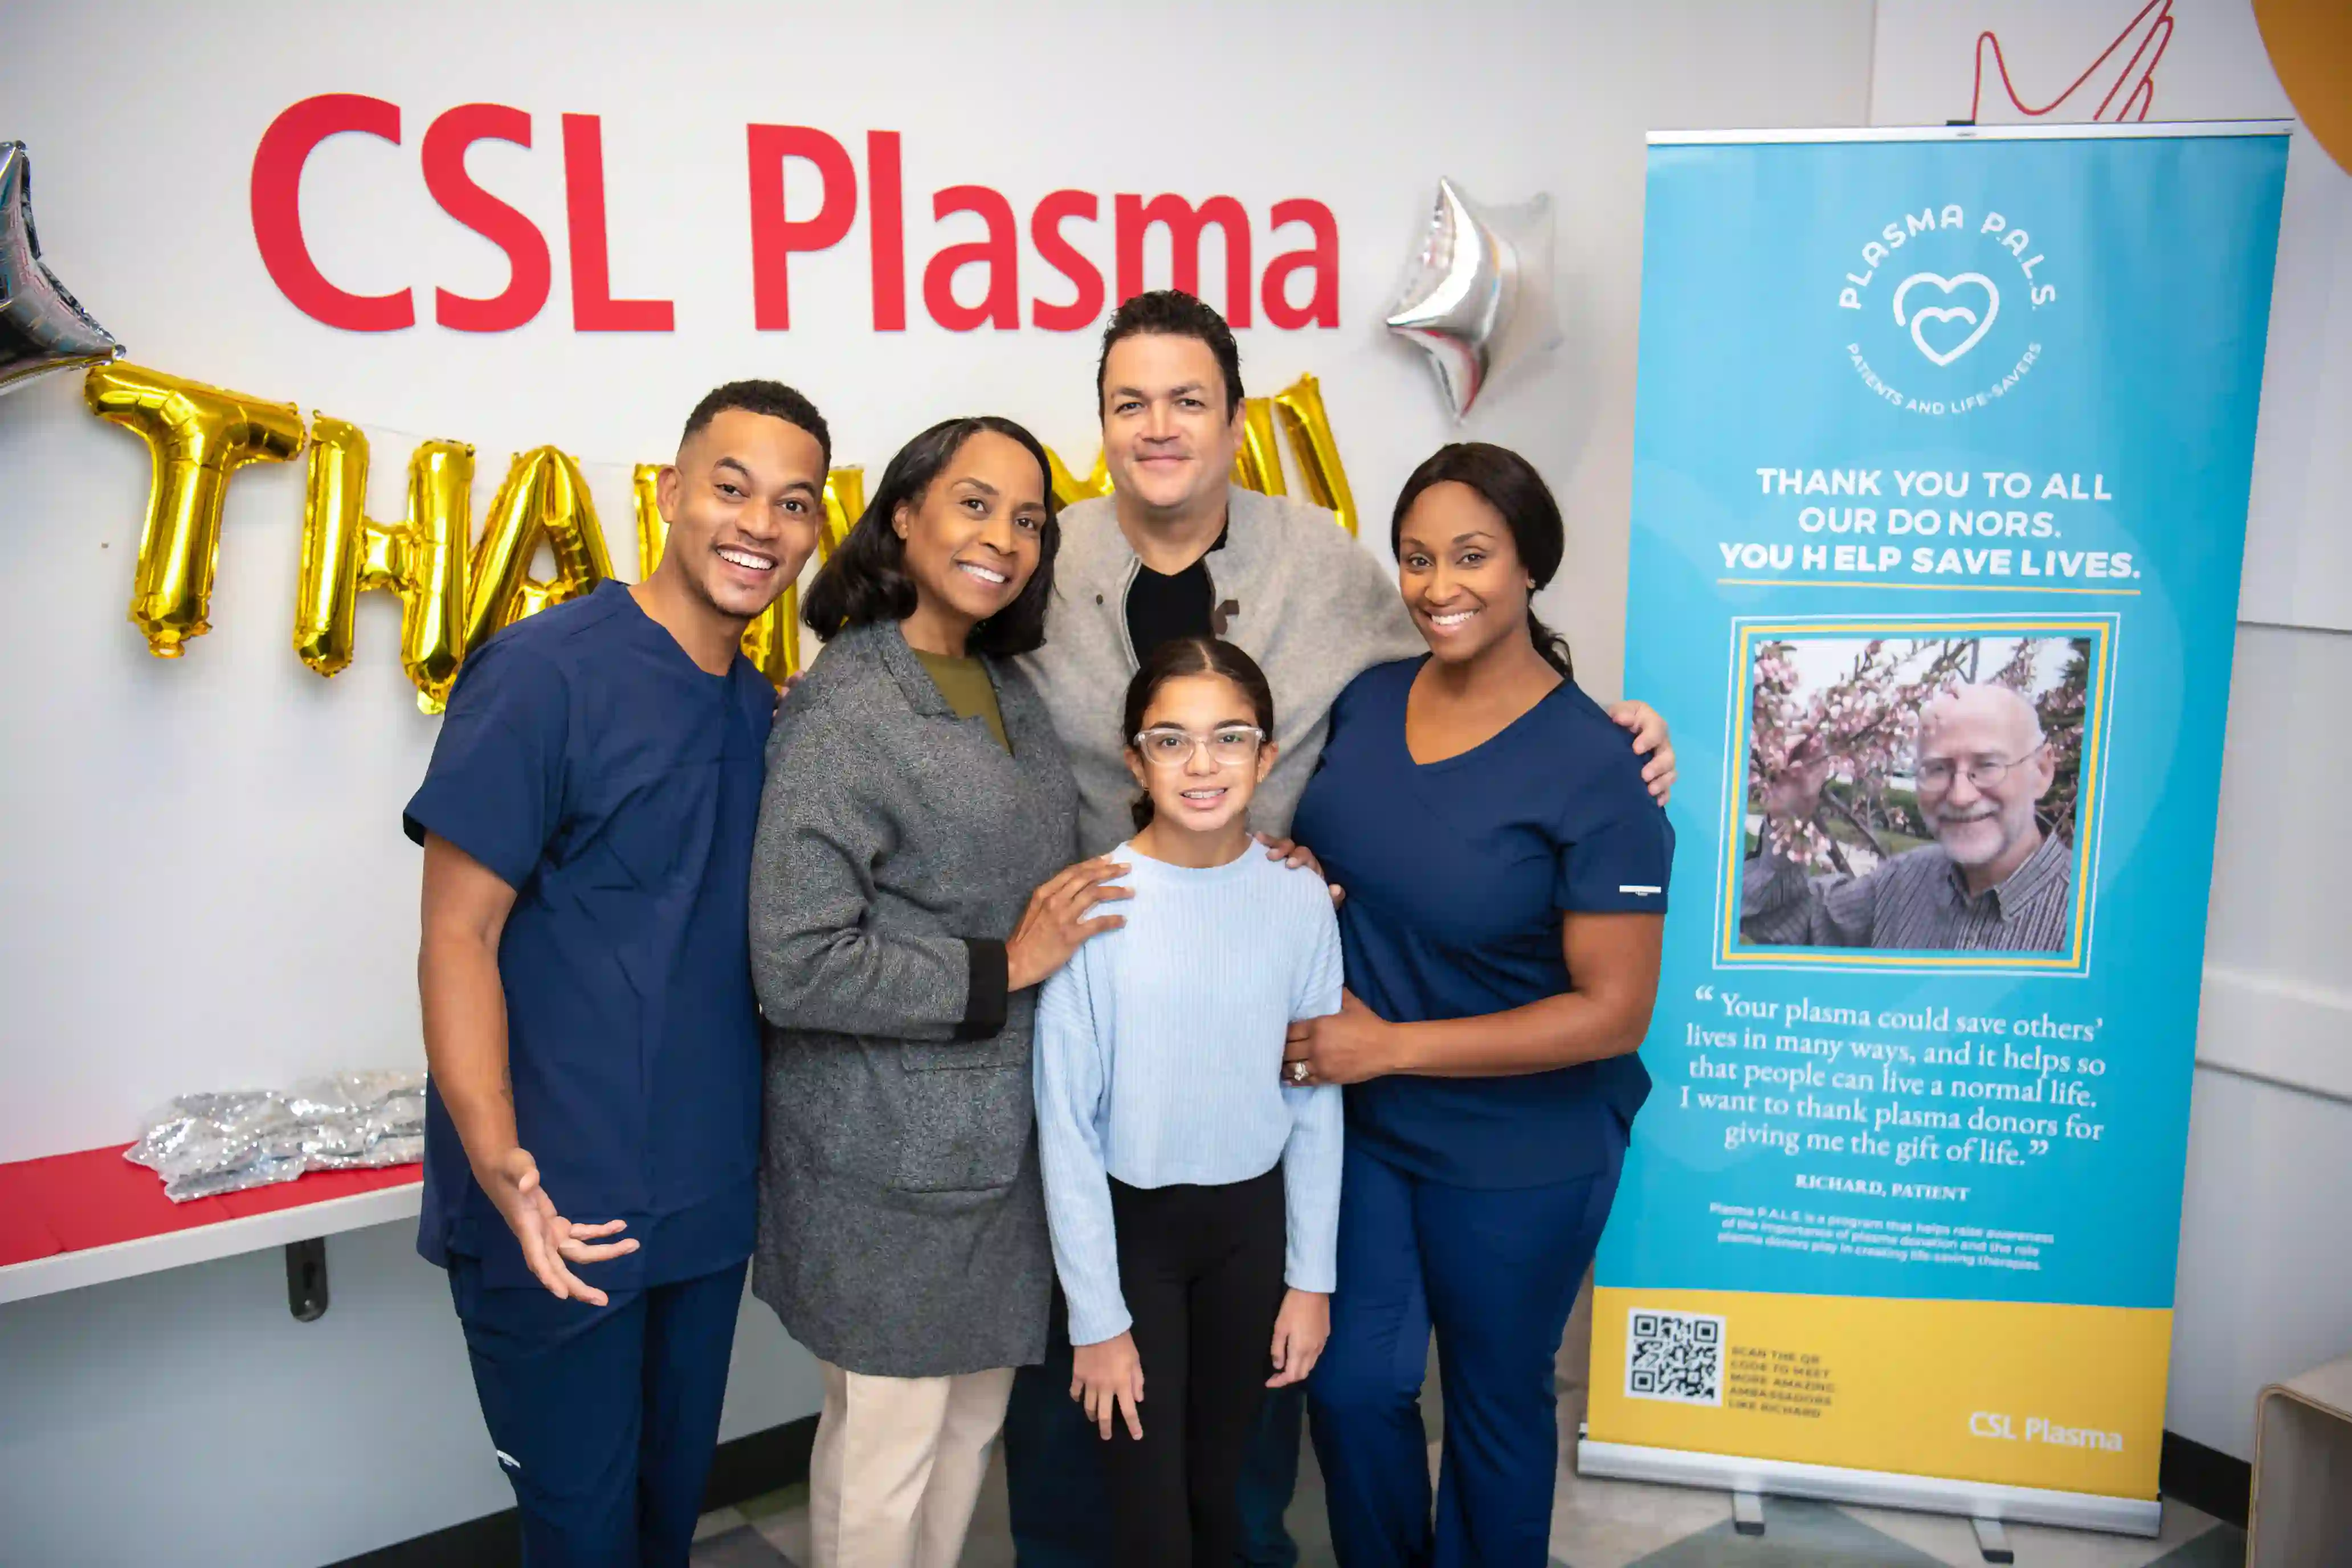 CSL Plasma employees with a plasma patient